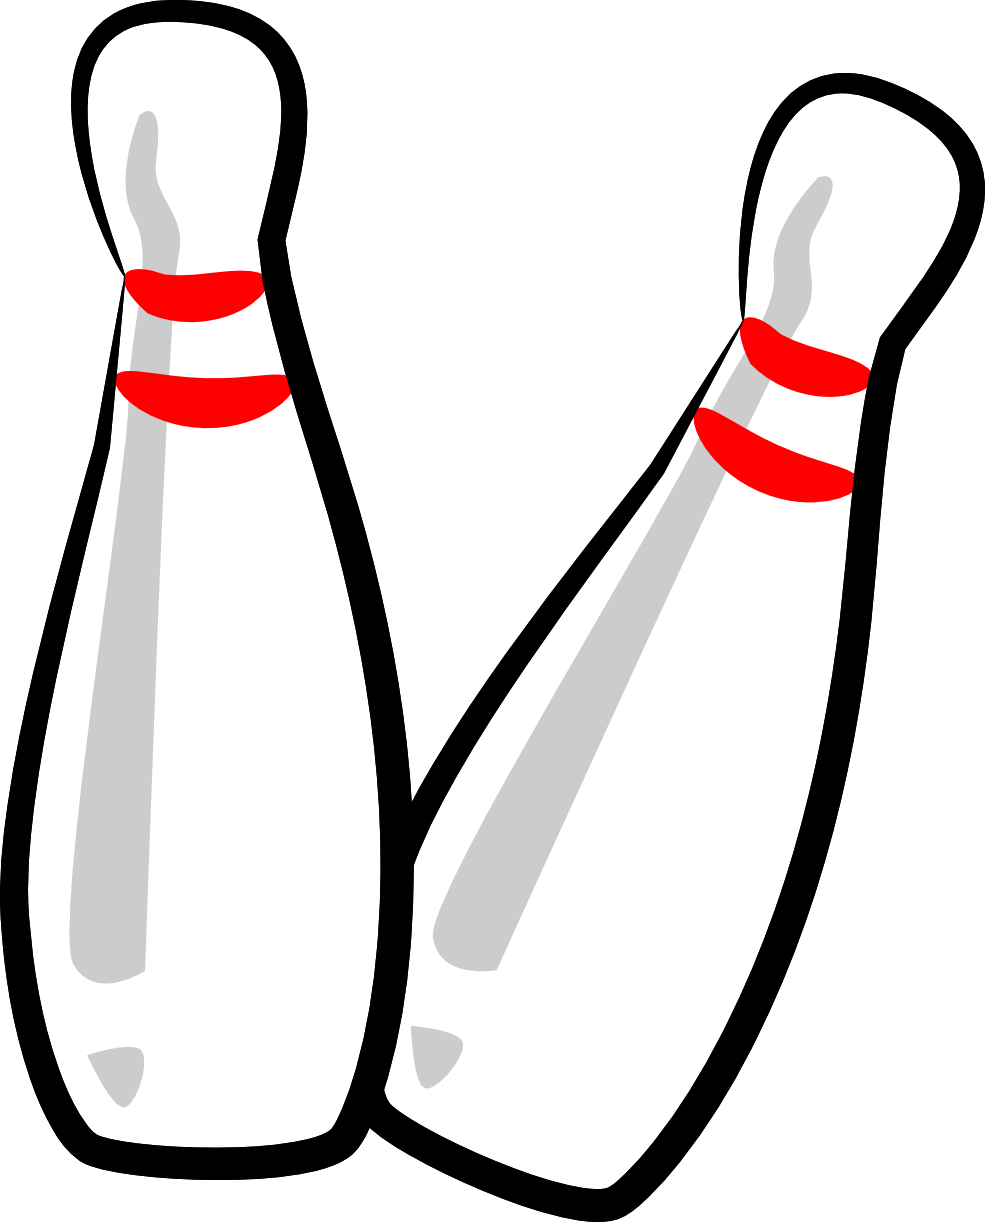 Bowling Pin Clipart - ClipArt Best